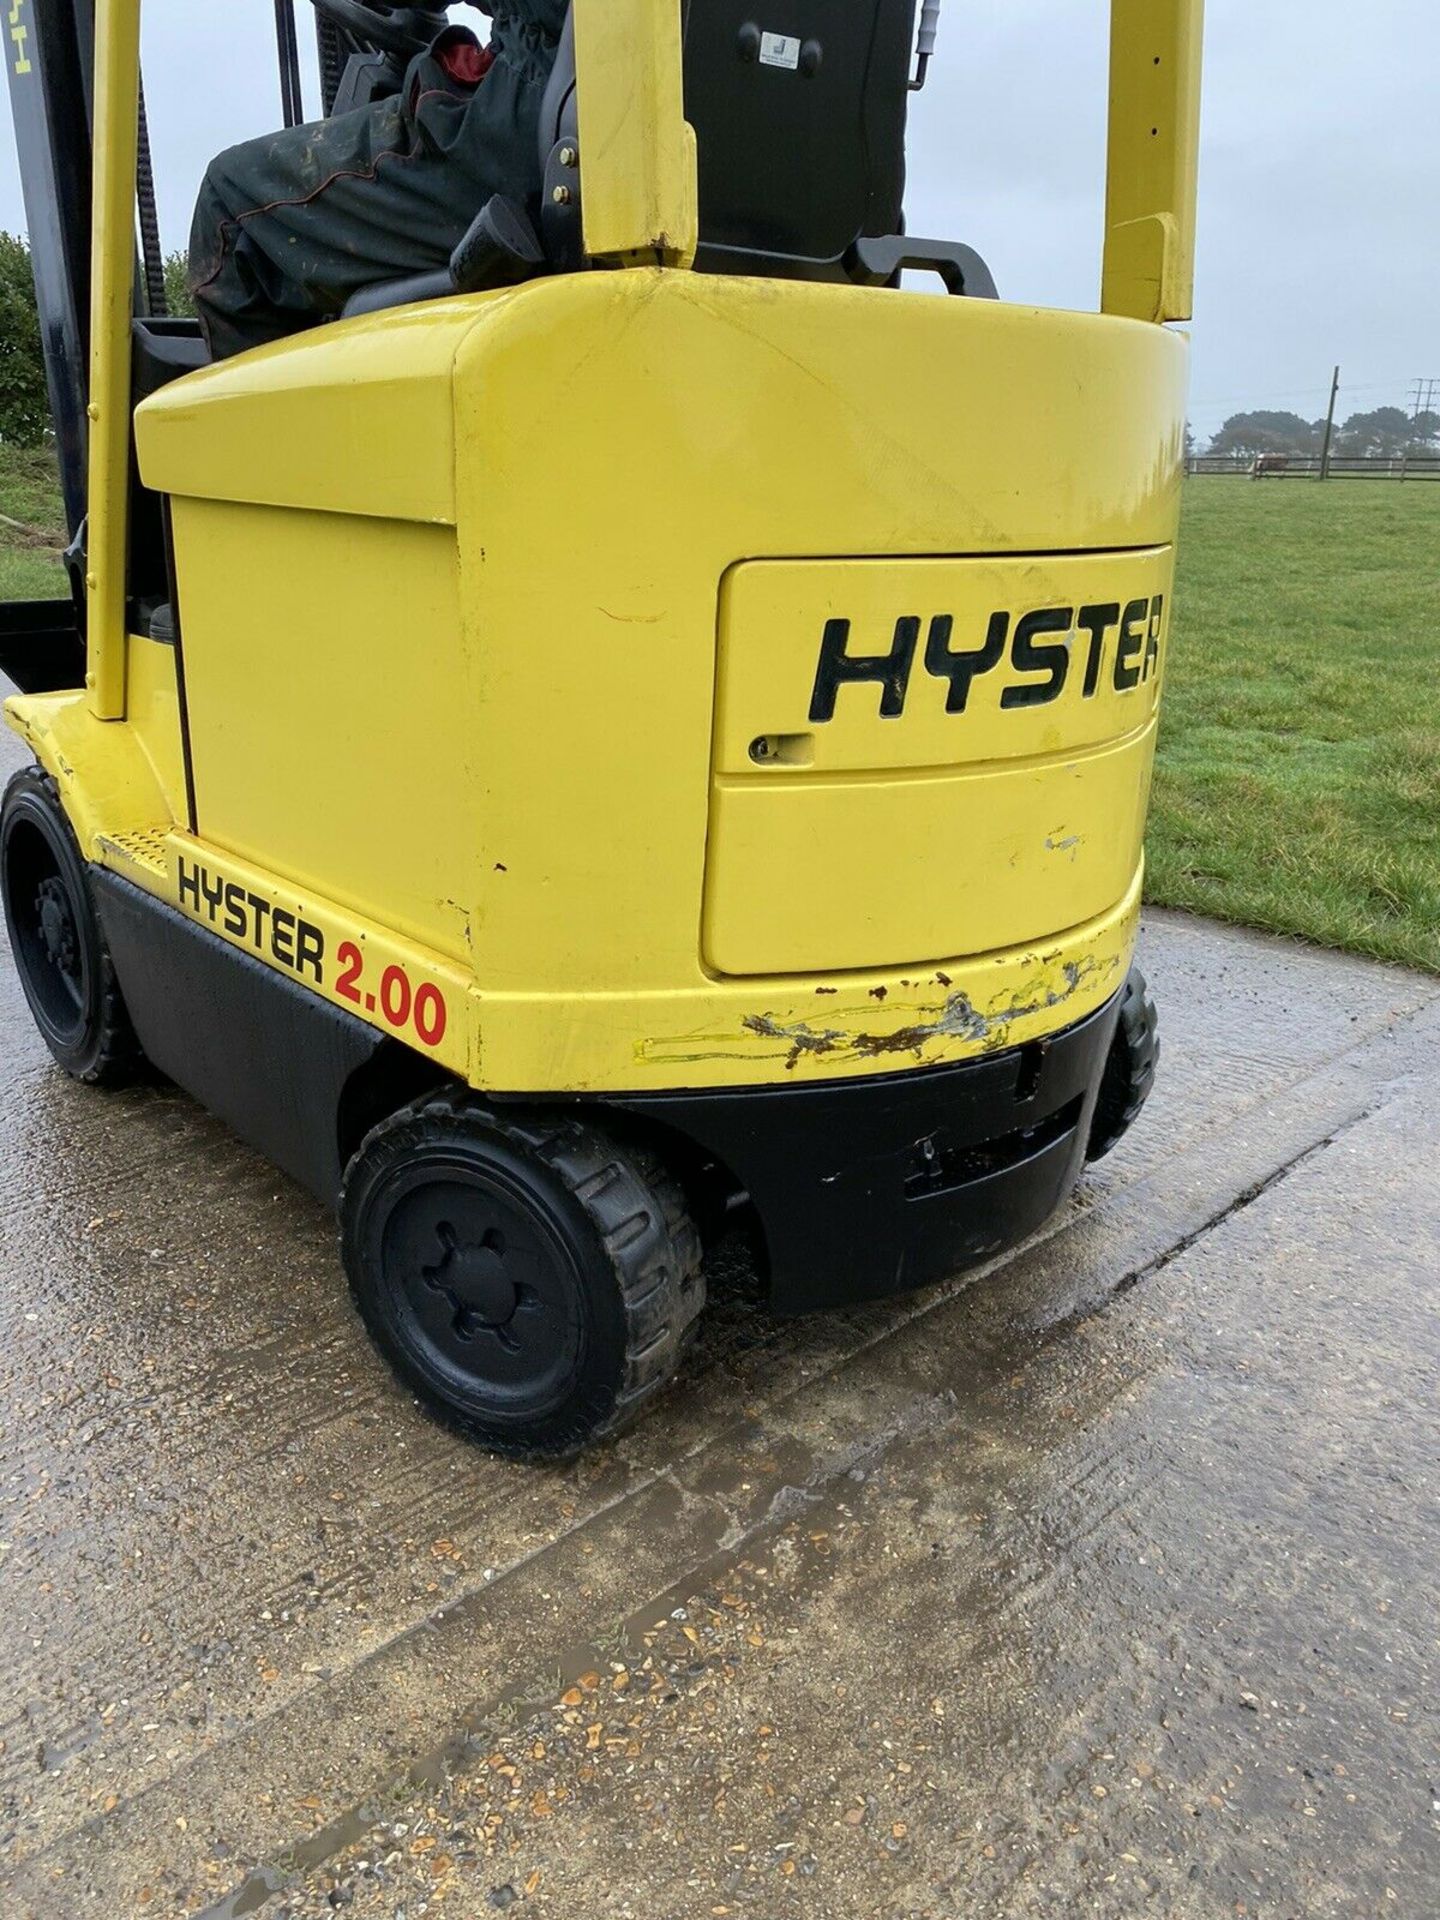 Hyster 2 Tonne Electric Forklift - Image 6 of 6